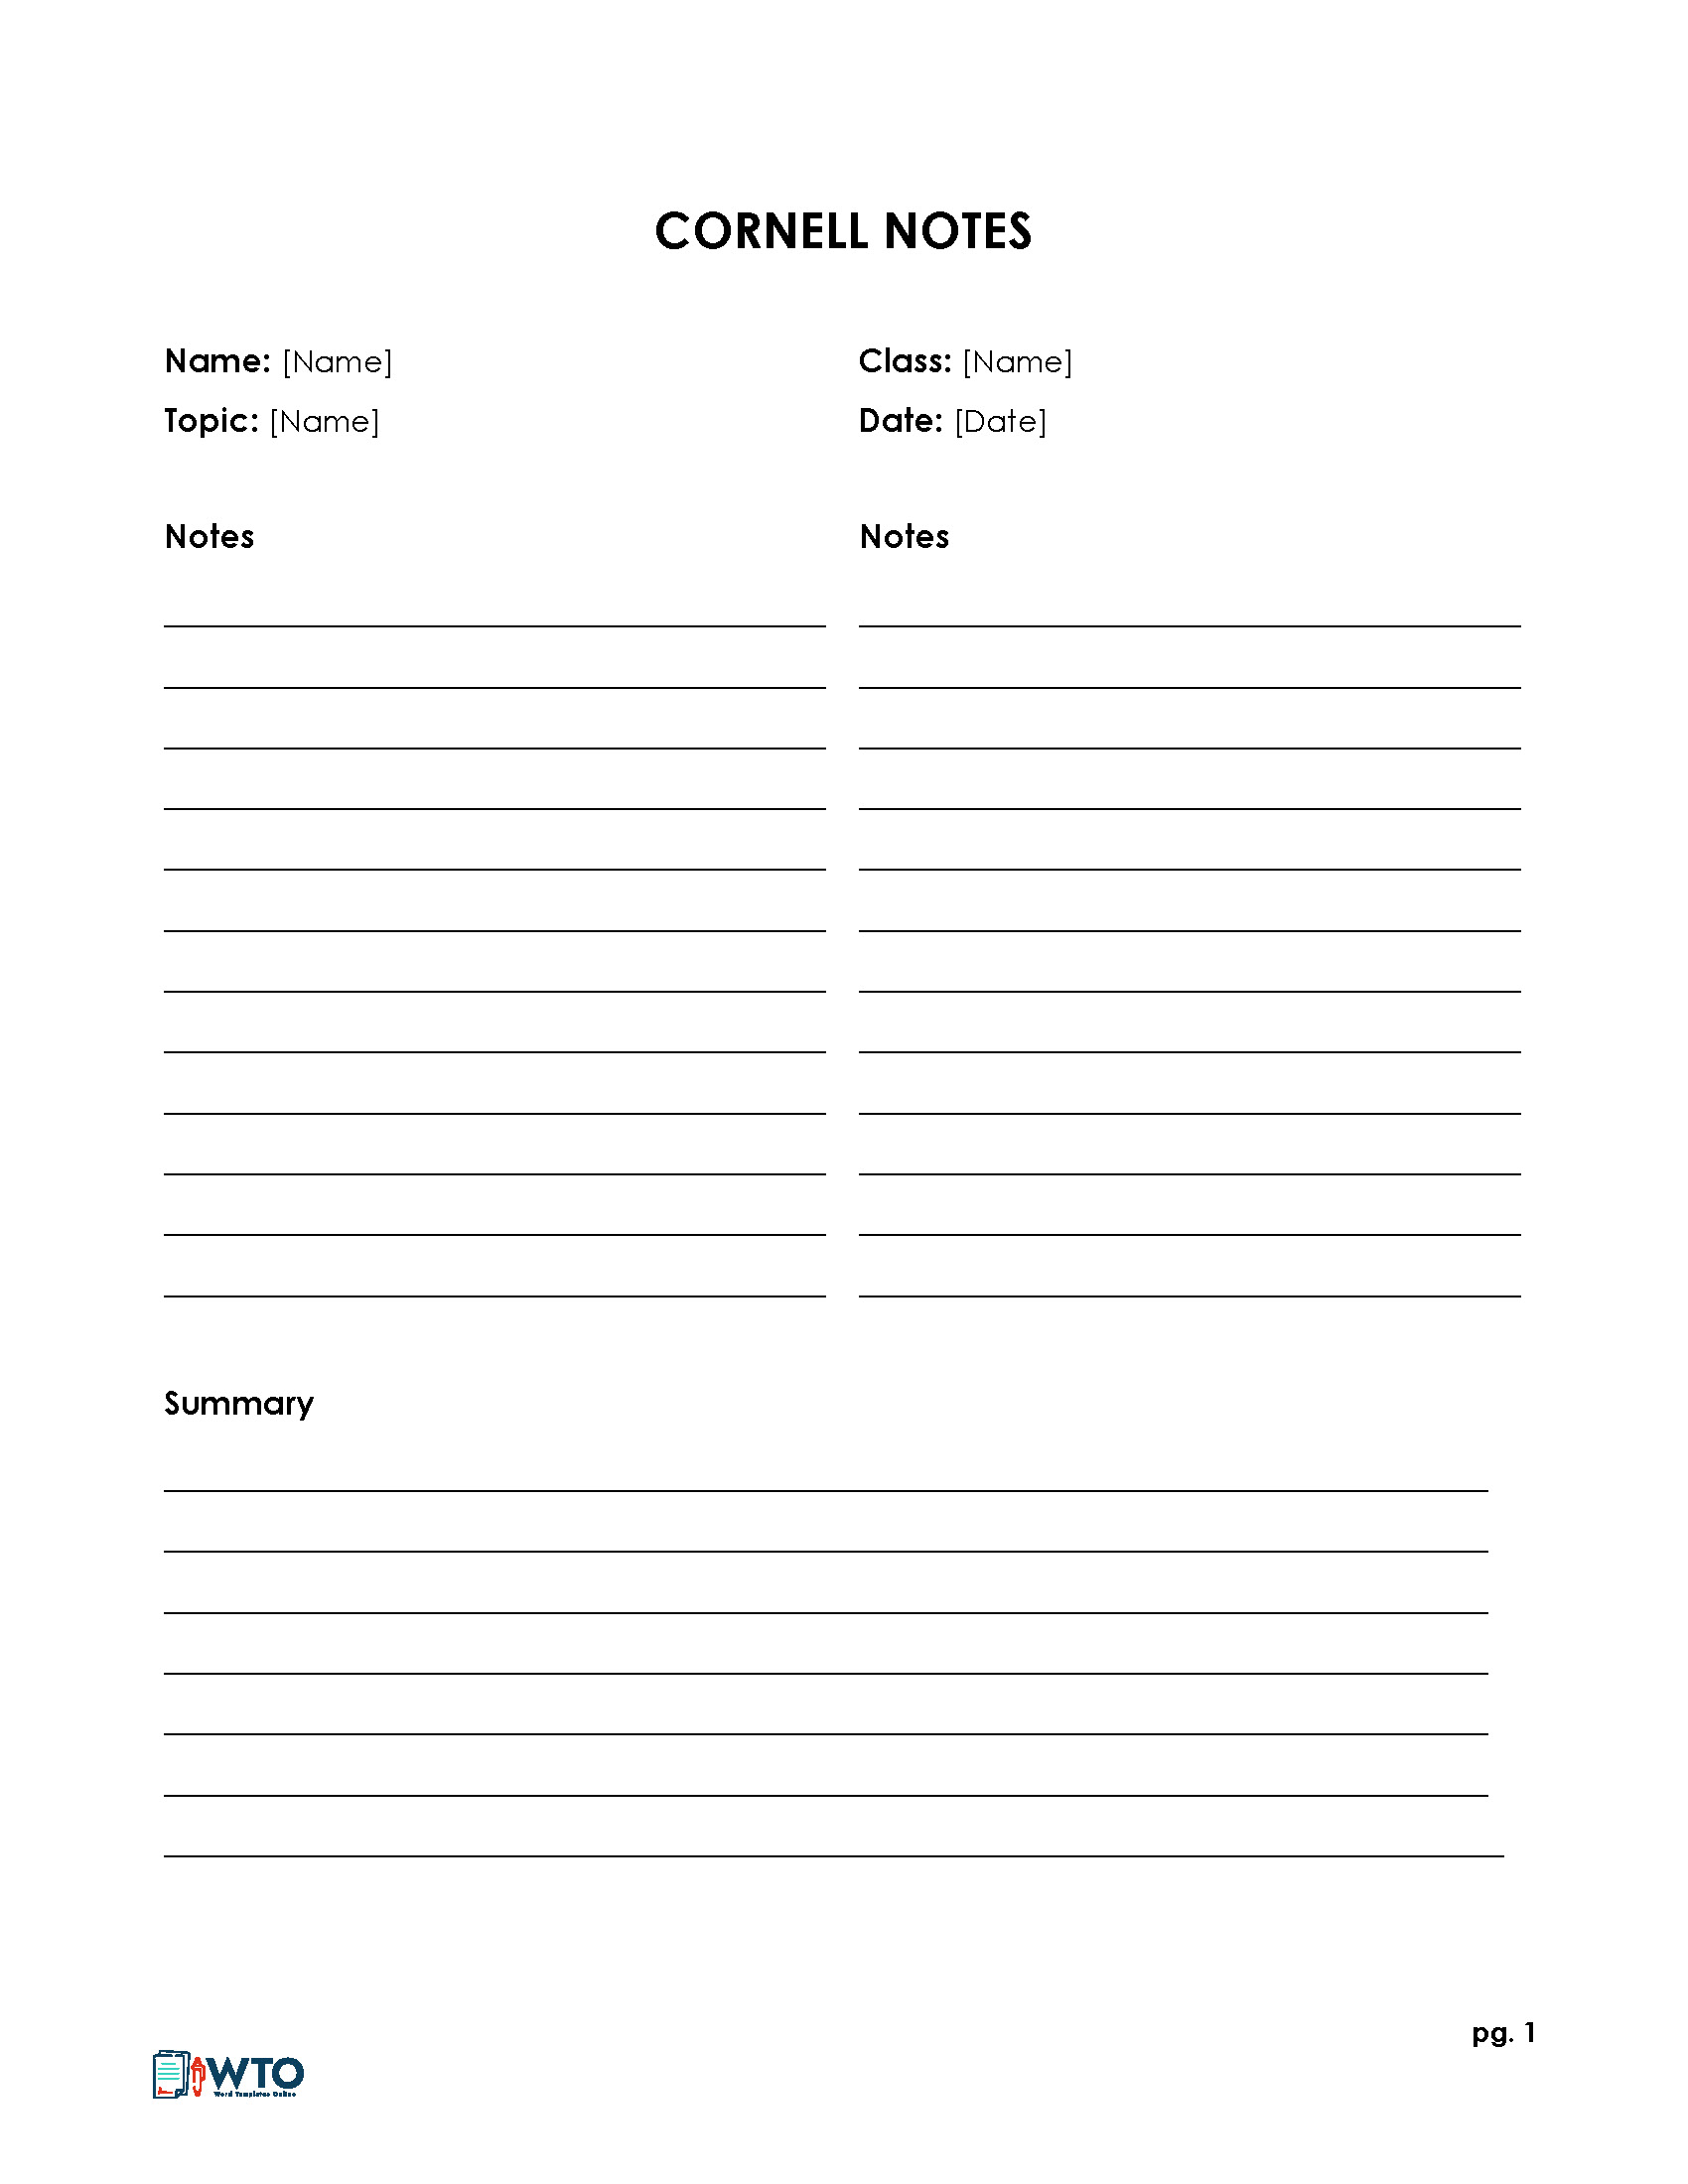 cornell note taking template excel